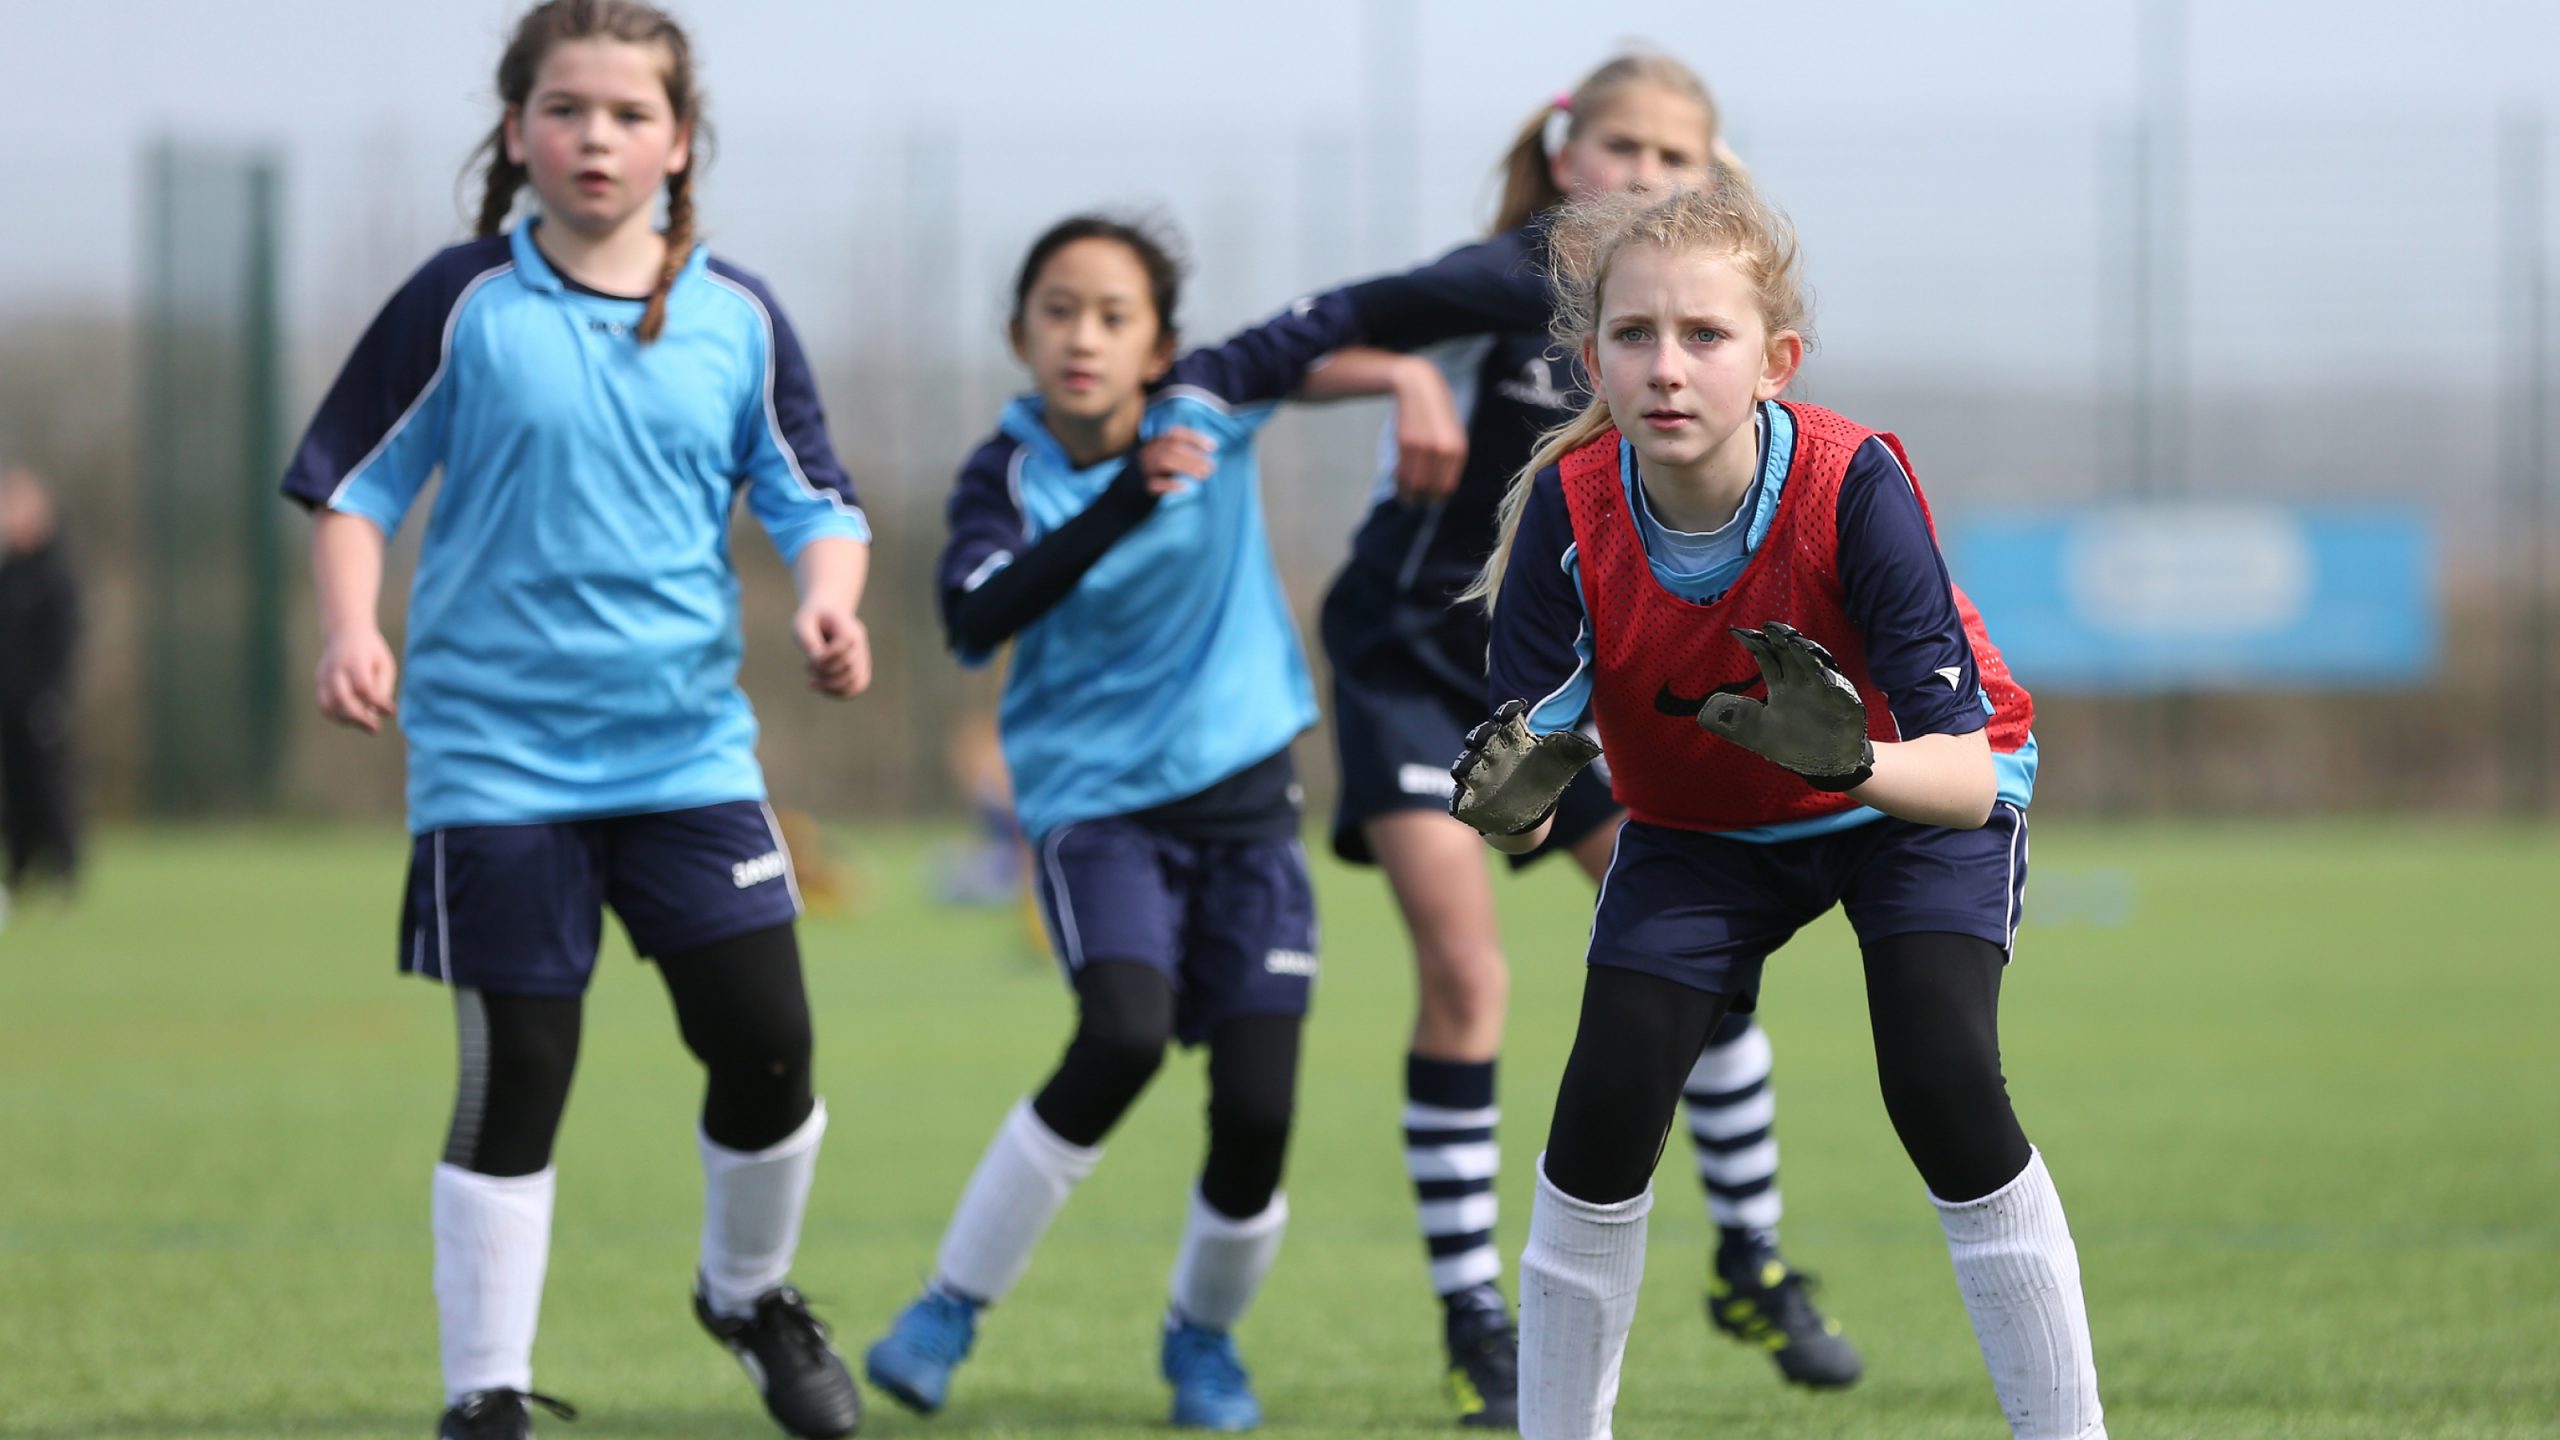 girl goalkeeper and other girls playing